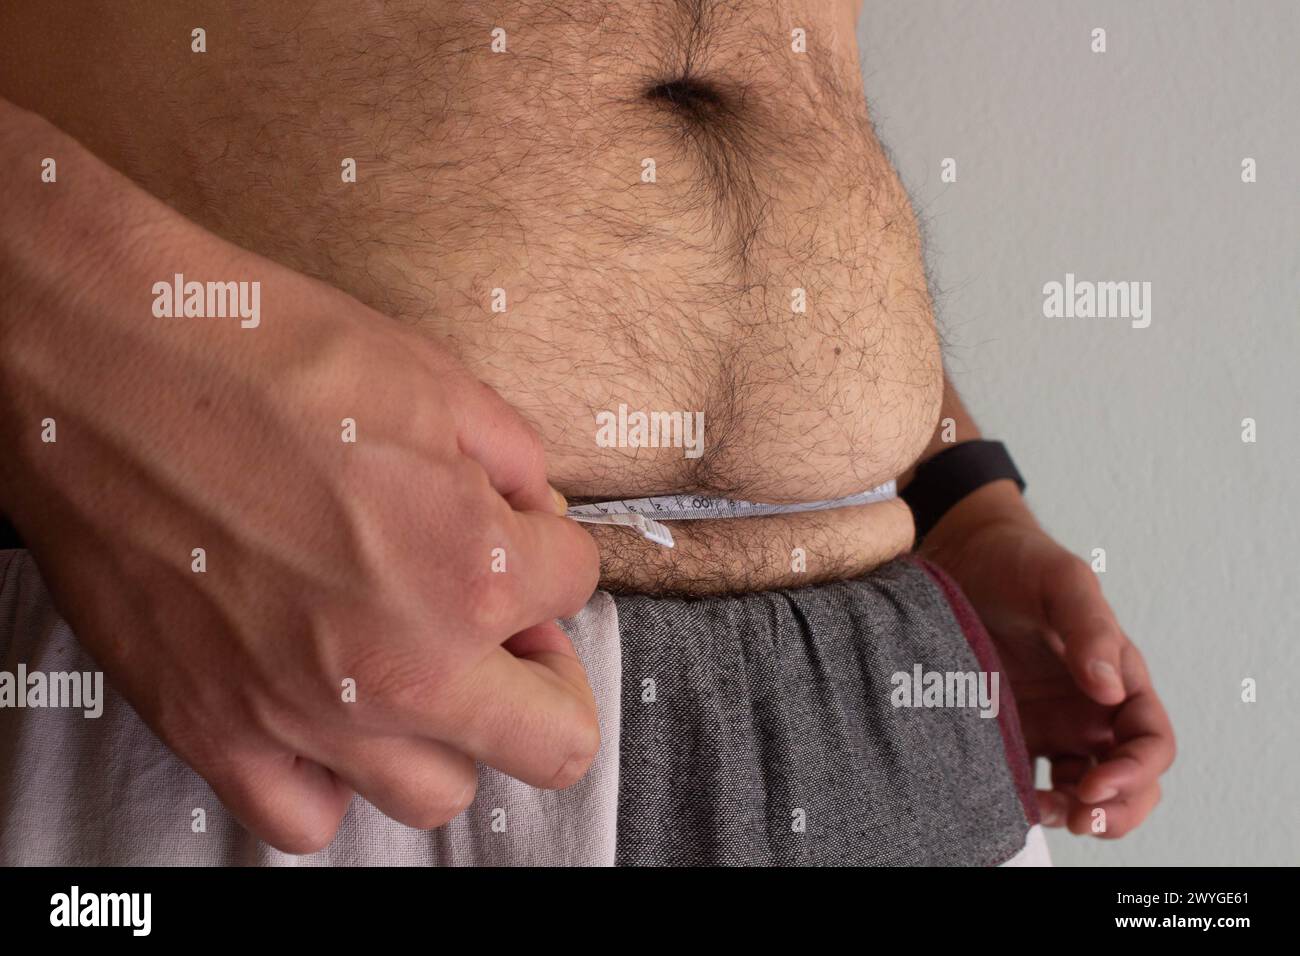 Witness the journey of an overweight male as he takes charge of his health, measuring his waist with determination amidst visible stretch marks Stock Photo